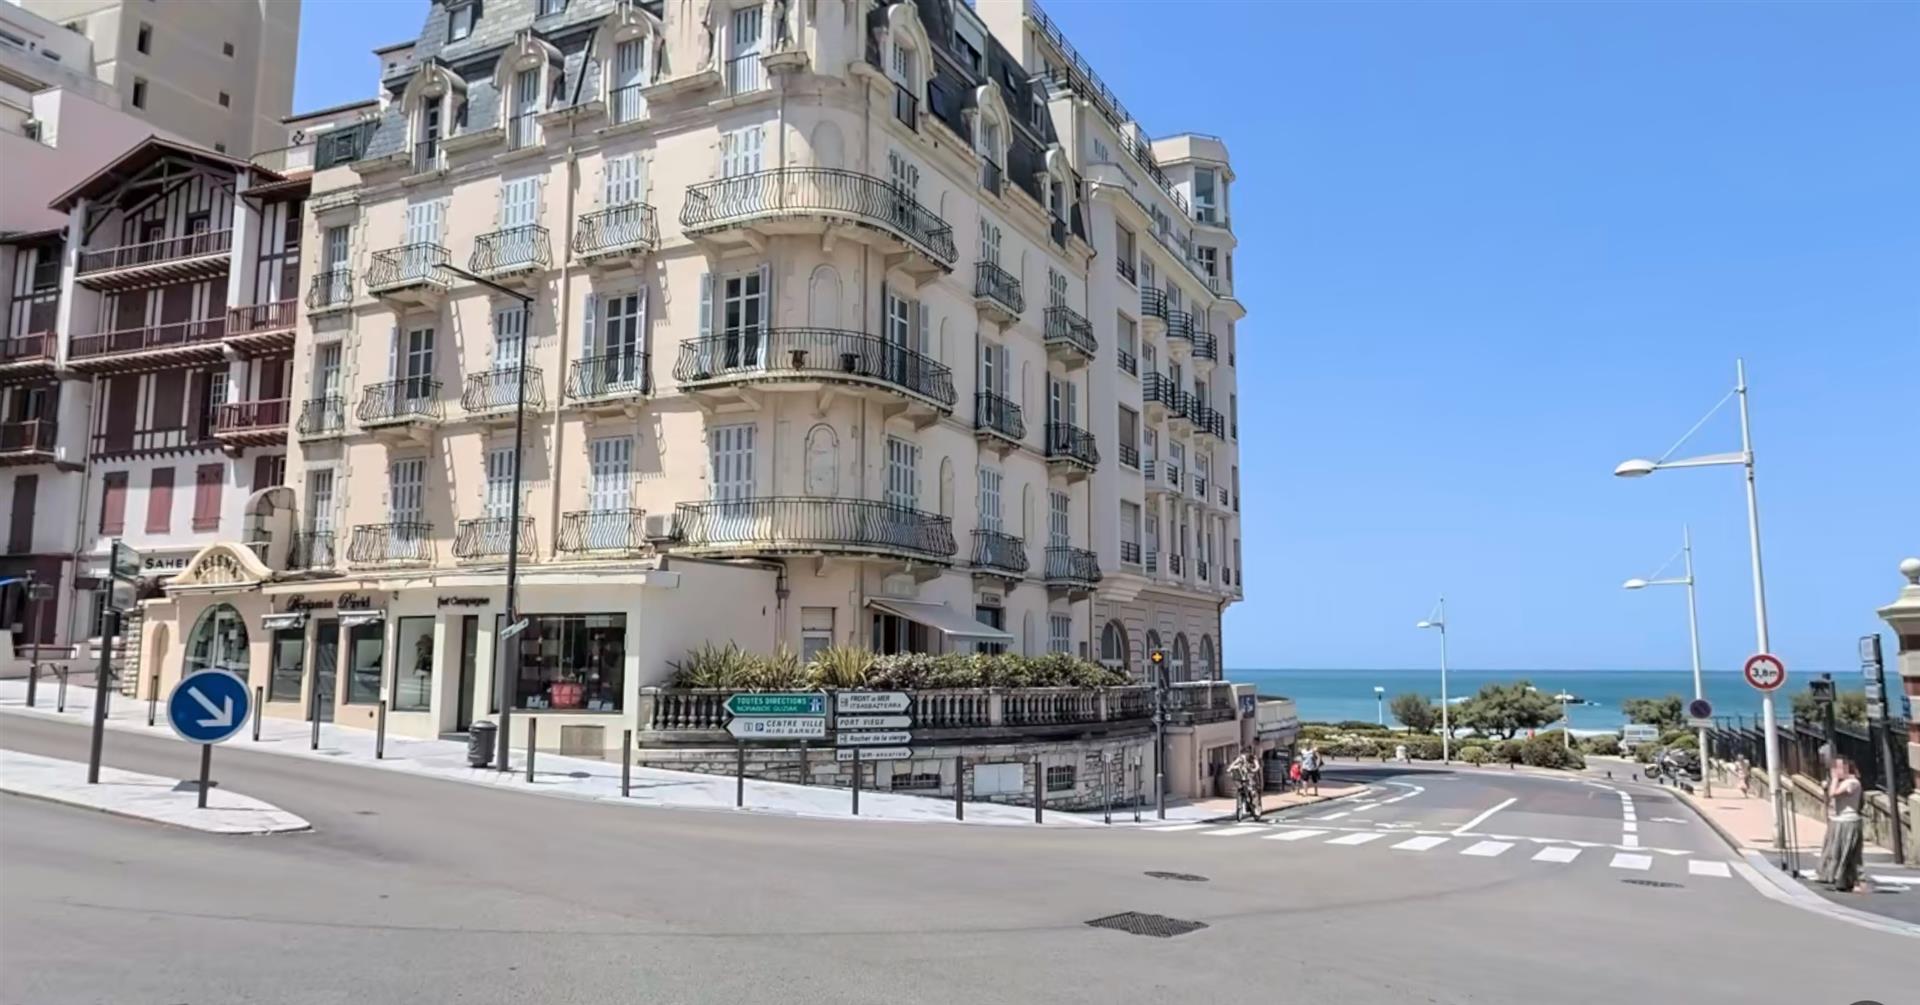 Imperial district Biarritz - Beach at the foot of the building